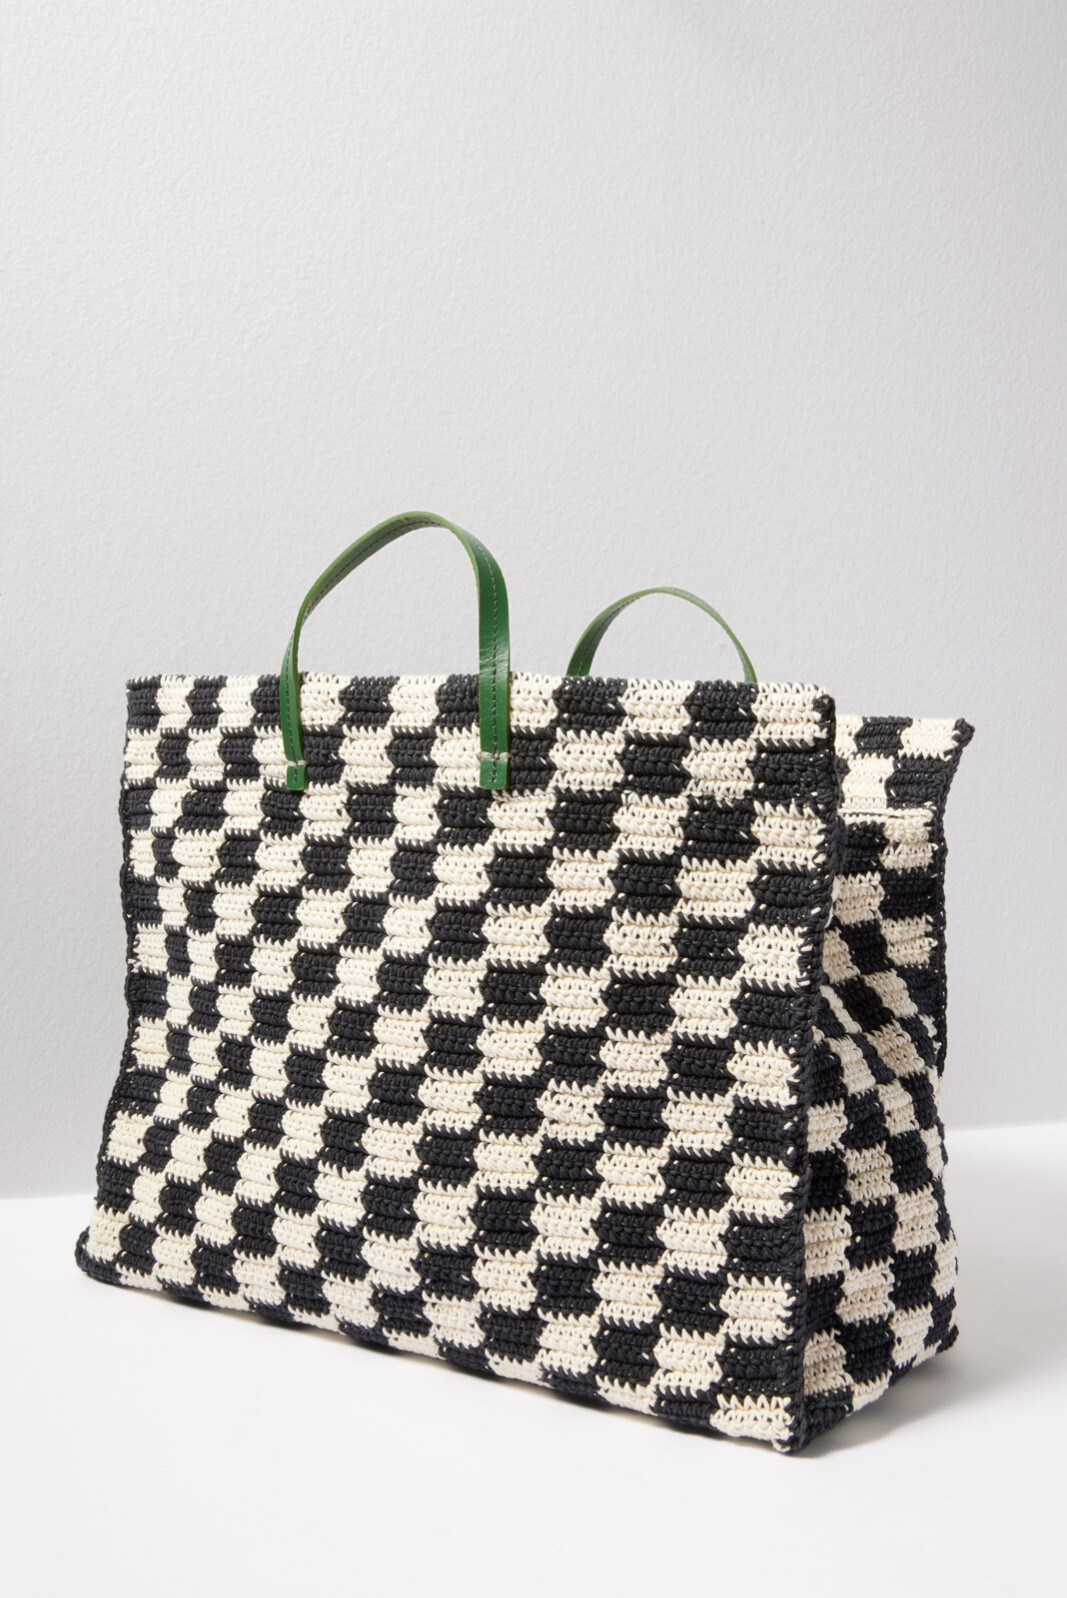 CLARE V SIMPLE SUMMER TOTE